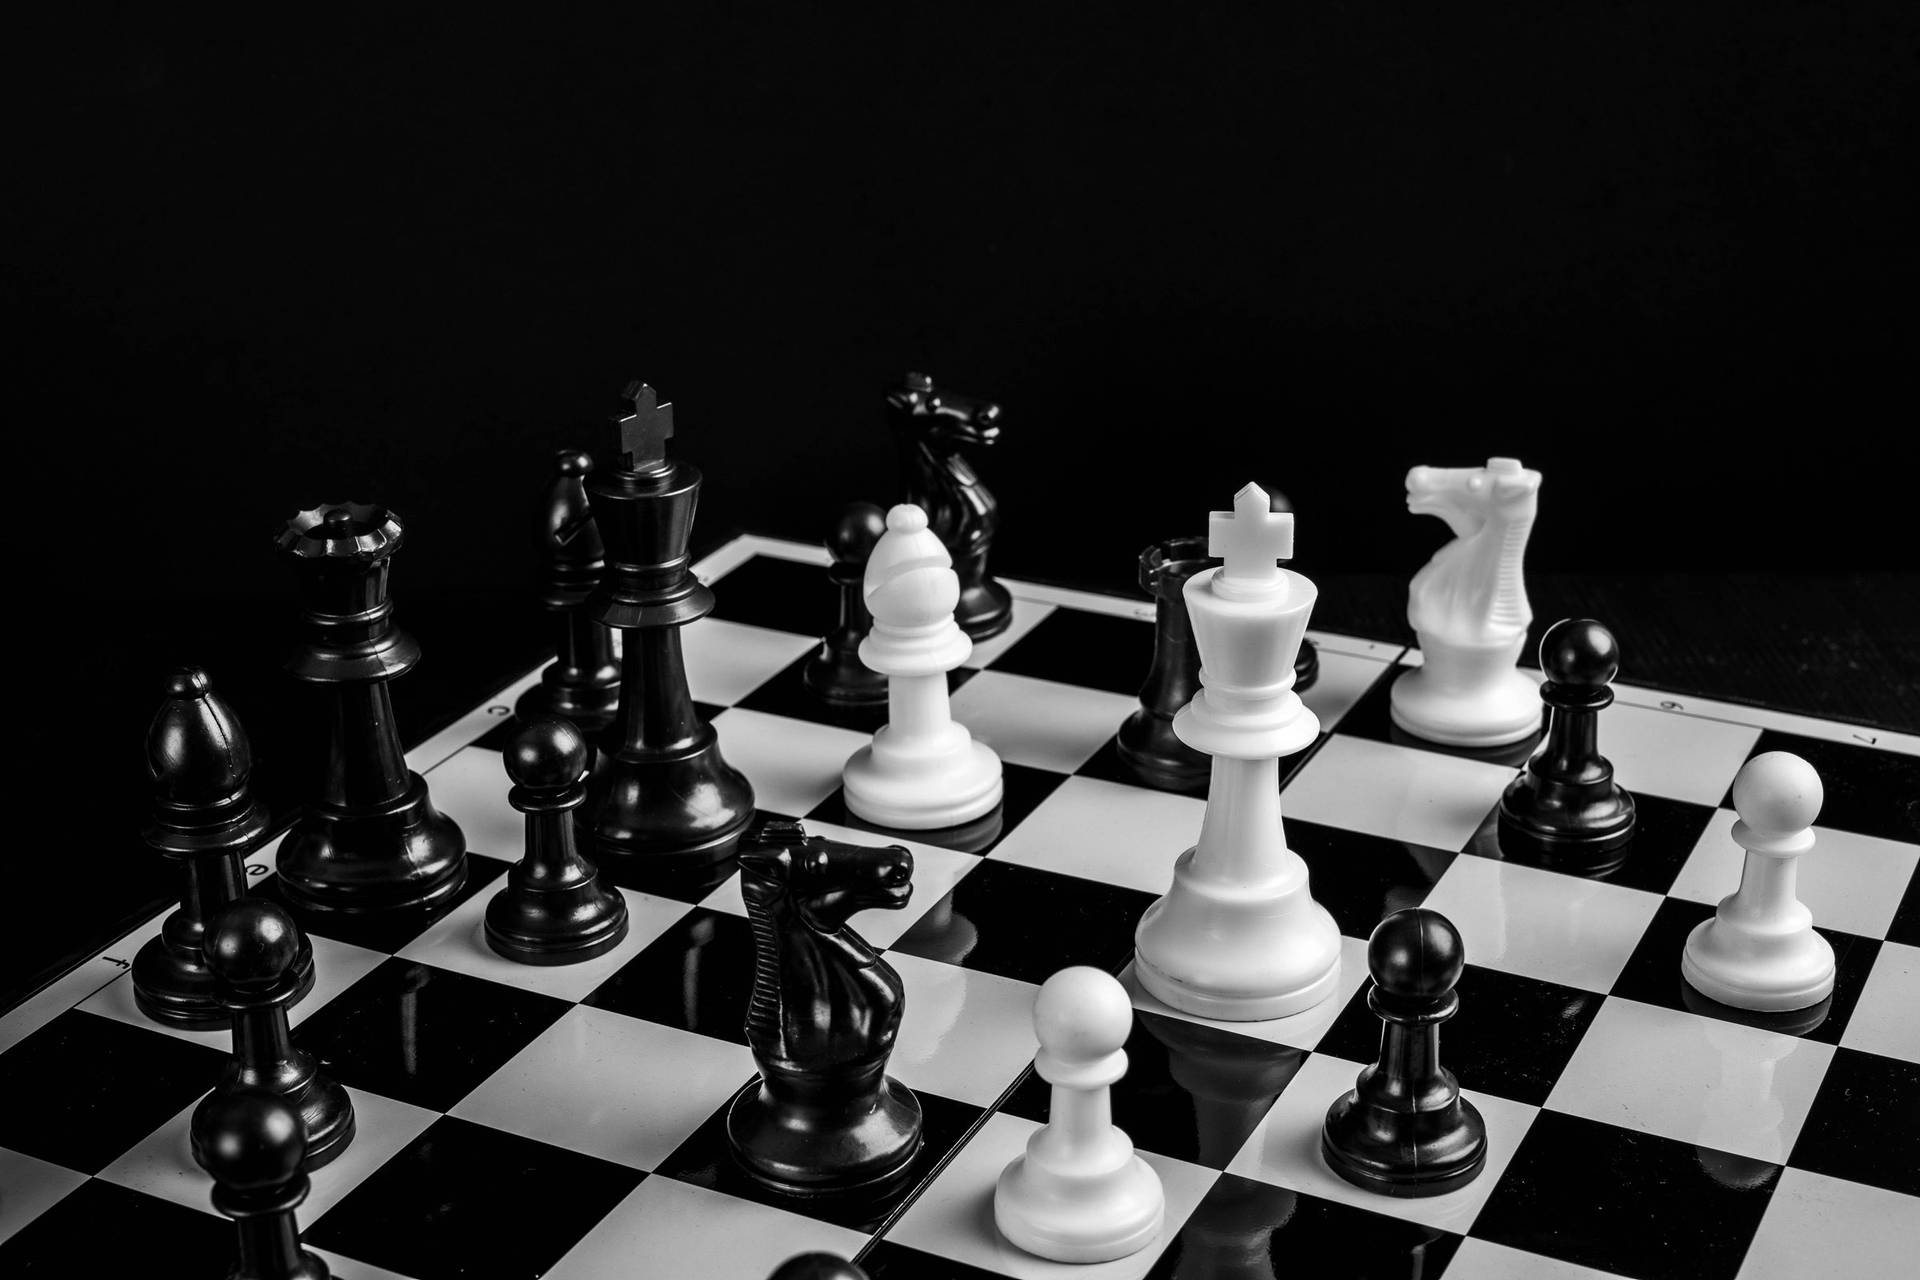 Free Chess Wallpaper Downloads, [100+] Chess Wallpapers for FREE |  